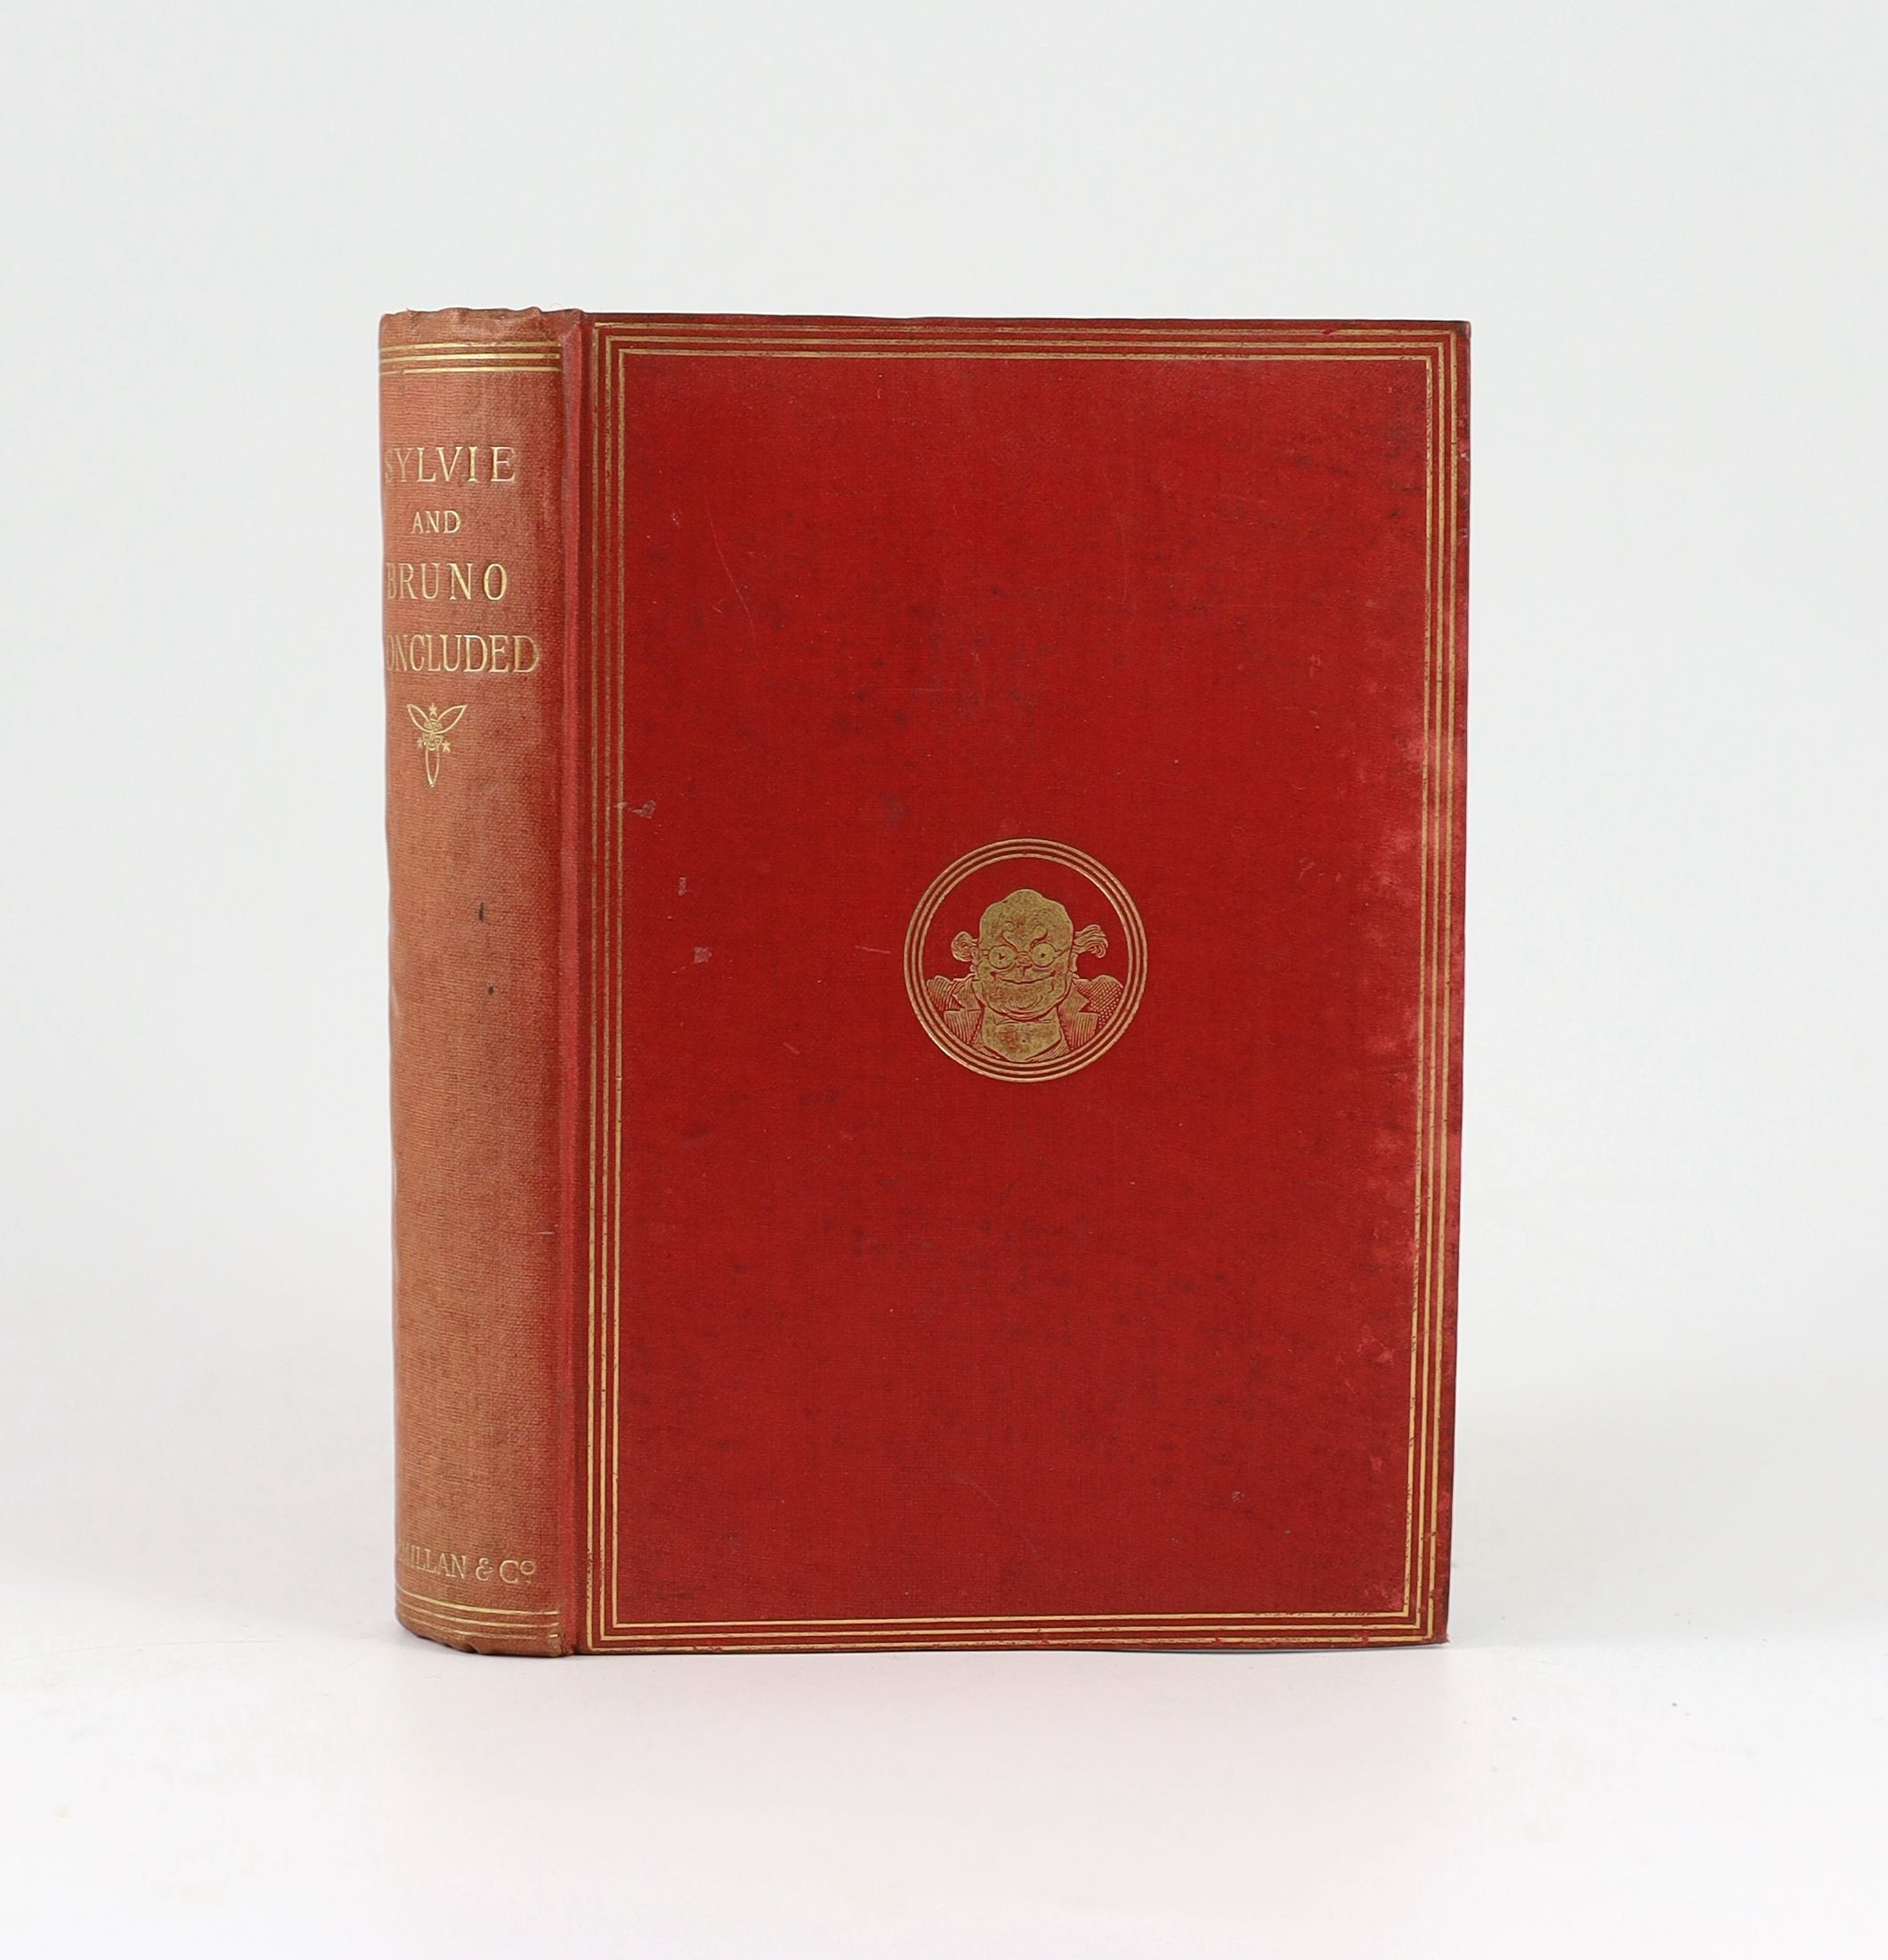 Dodgson, Charles Lutwidge (‘’Lewis Carroll’’) - Sylvie and Bruno Concluded, 1st edition, illustrated by Harry Furniss, advertisements at end, 8vo, original red cloth gilt, all edges gilt, half title inscribed, ‘’Mrs Fall